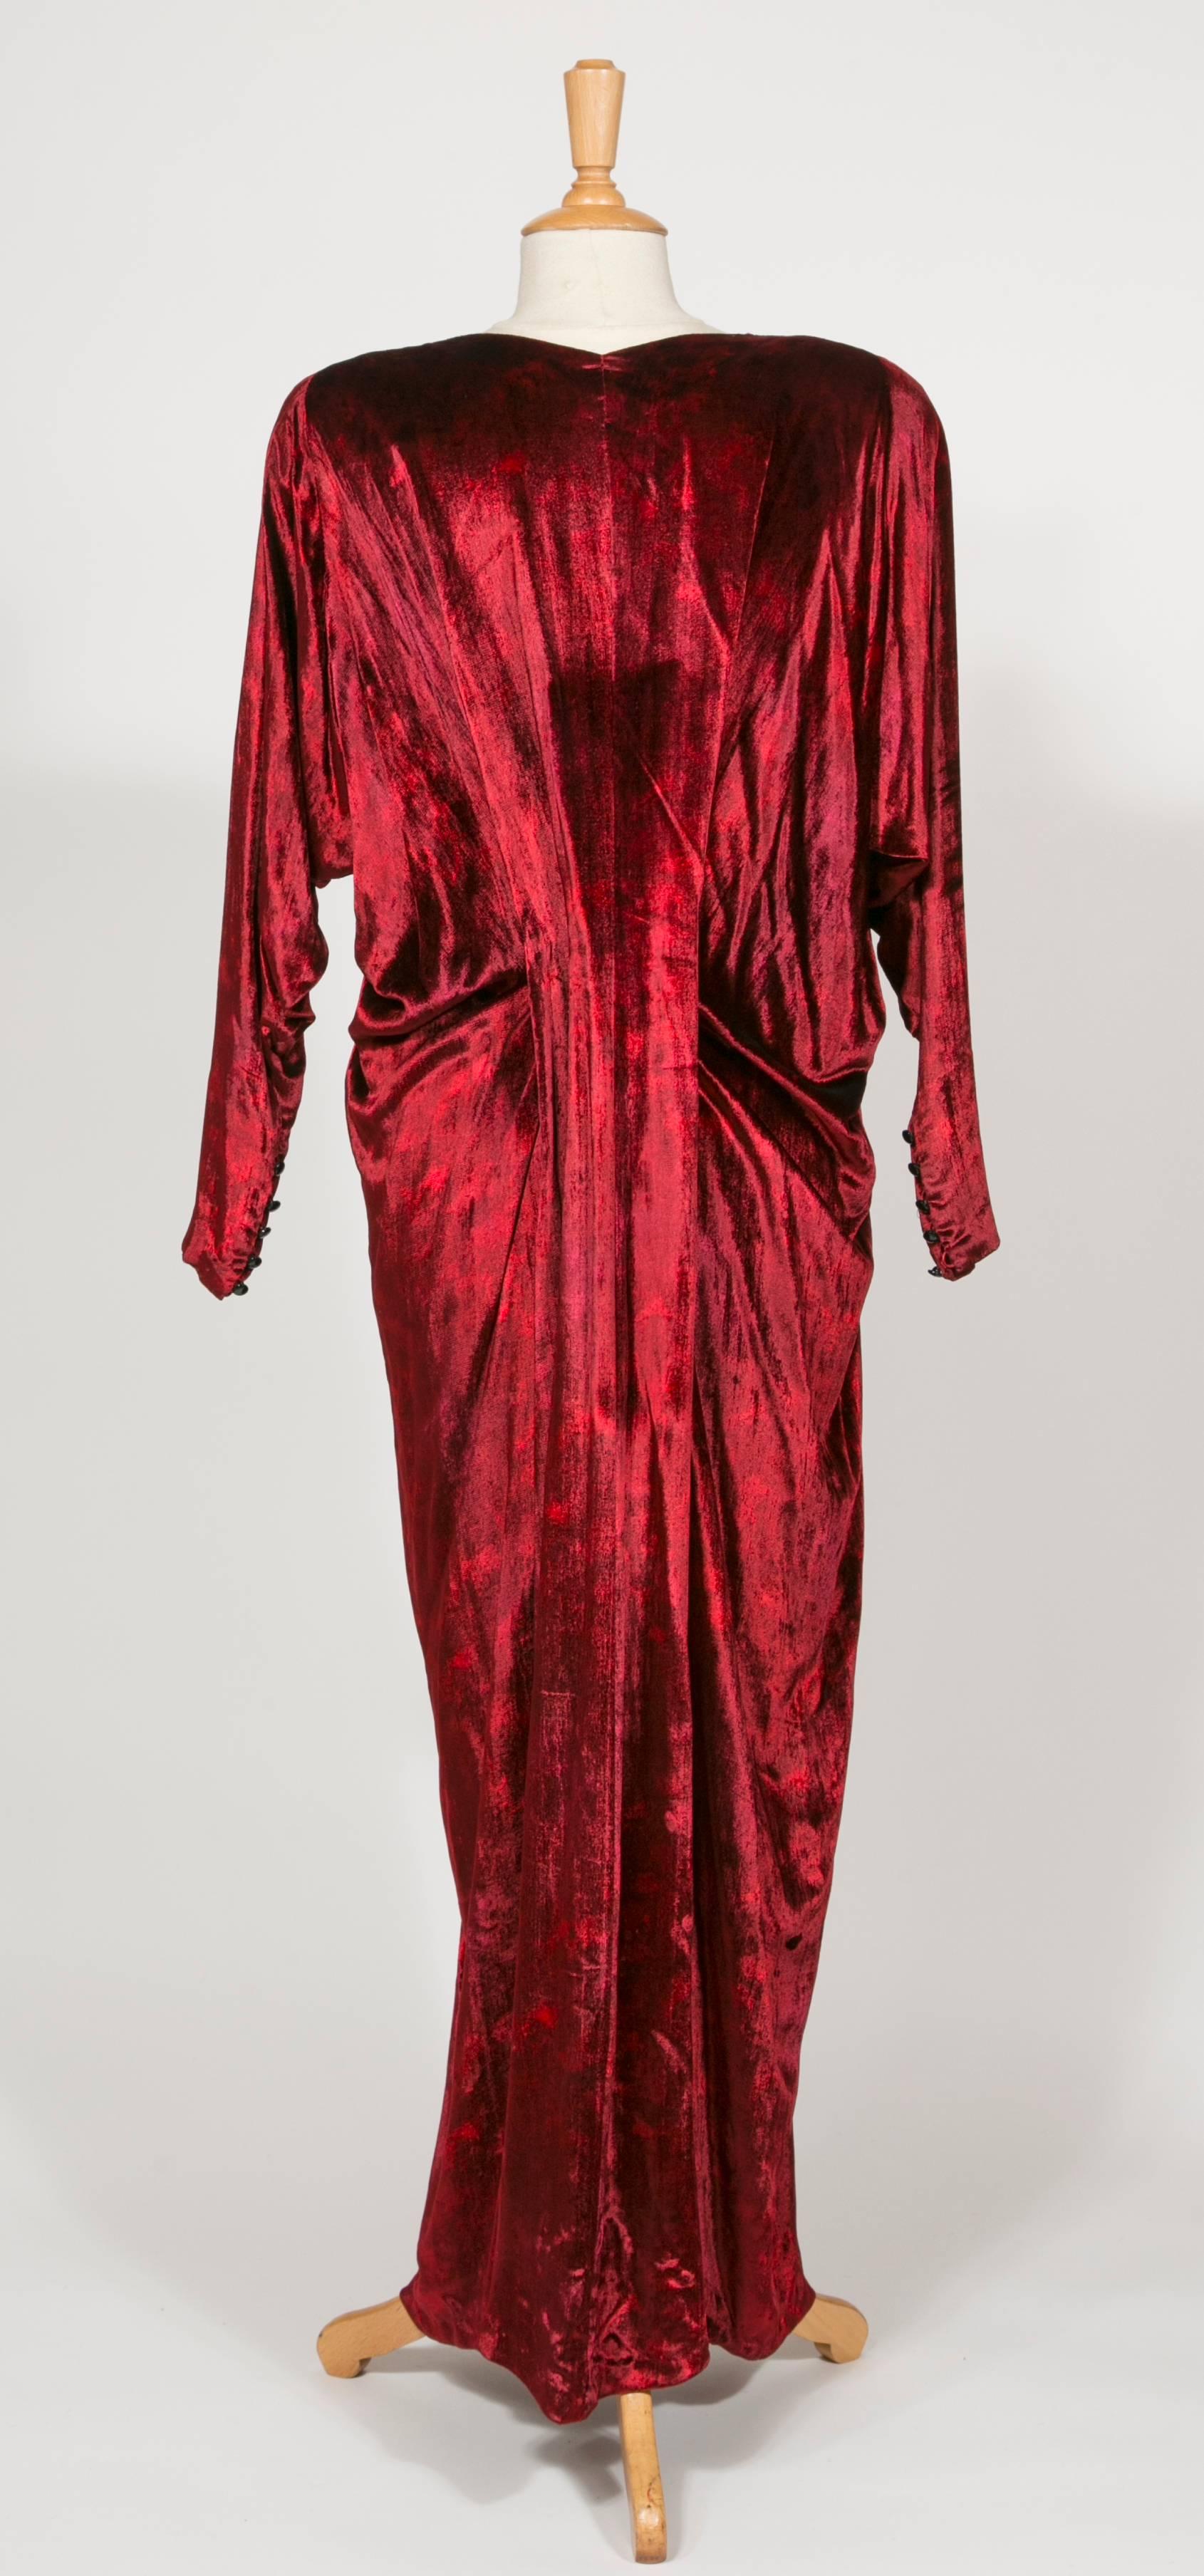 1975 Yves Saint Laurent Haute Couture Iconic  Ruby Silk Velvet  Evening Dress
This stunning long dress : Oriental inspiration with kimono long sleeves 5 black buttons on the wrist . One big black velvet flower on the V  décolleté.
A very long shawl